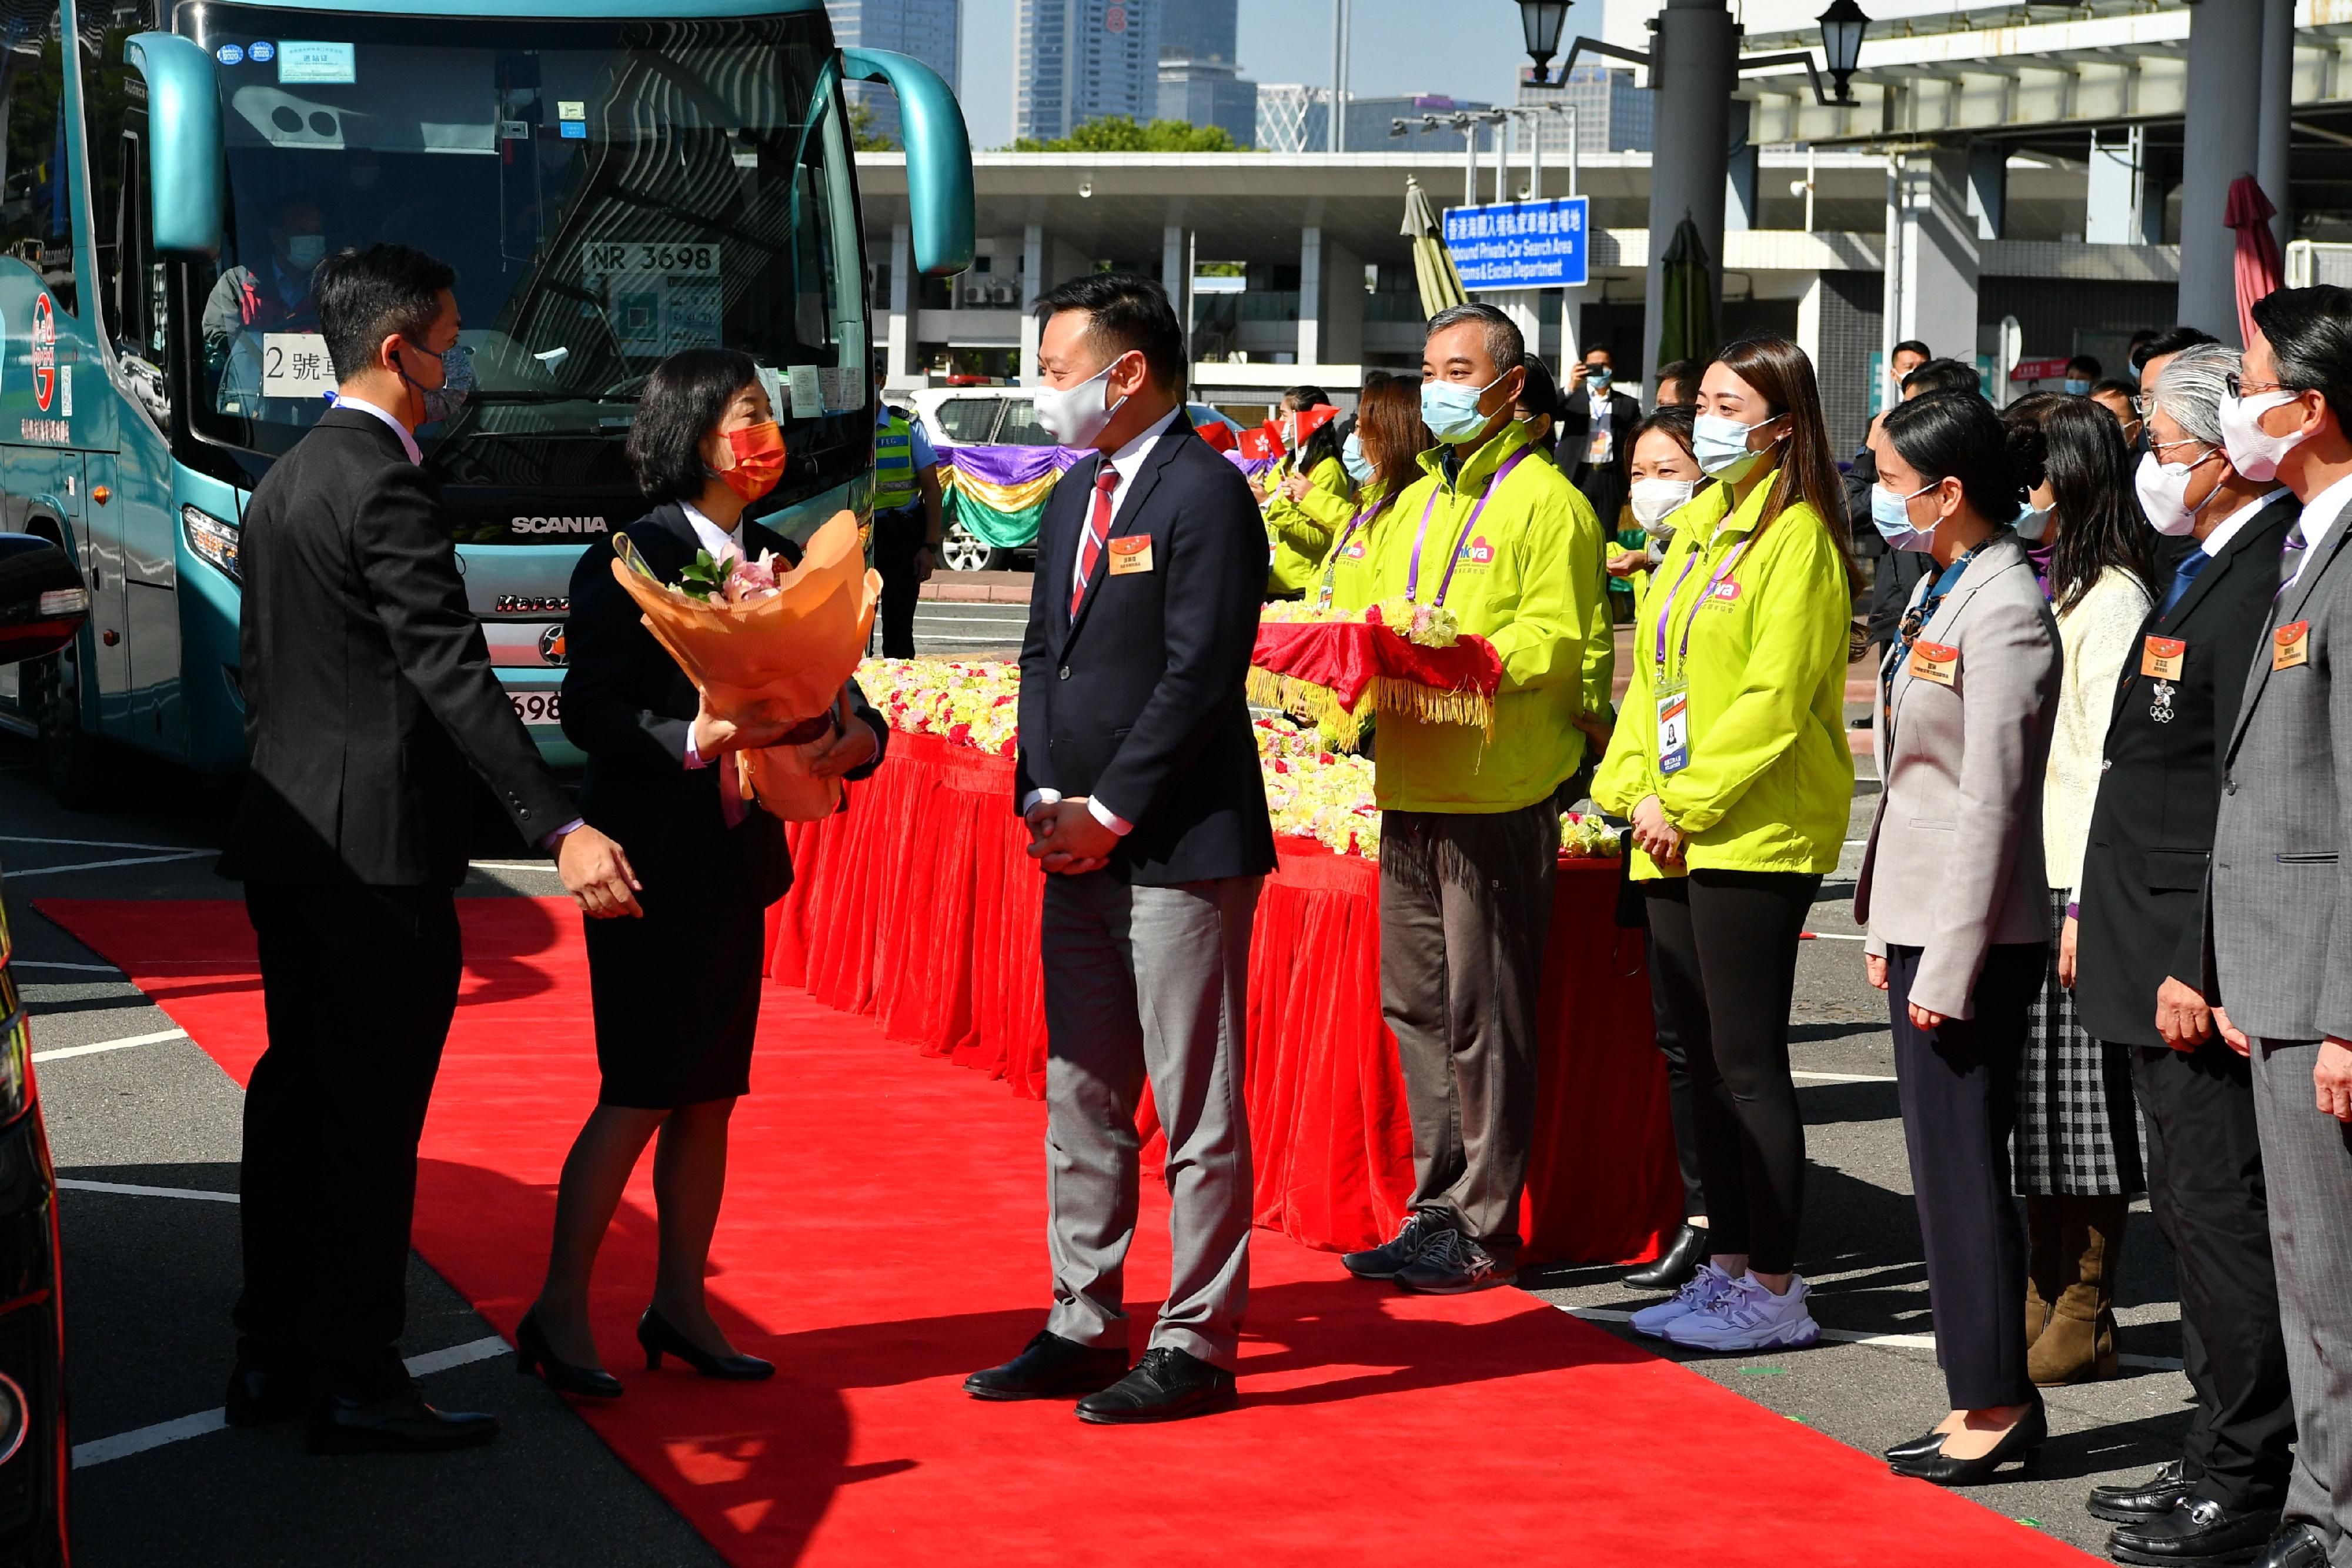 The Tokyo 2020 Olympic Games Mainland Olympians delegation arrives in Hong Kong today (December 3) for a three-day visit. Photo shows the Secretary for Home Affairs, Mr Caspar Tsui (third left), greeting the delegation at the Shenzhen Bay Port. Next to him are the Director of Leisure and Cultural Services, Mr Vincent Liu (first right); the Deputy Director-General of the Department of Publicity, Cultural and Sports Affairs of the Liaison Office of the Central People's Government in the Hong Kong Special Administrative Region, Ms Zheng Lin (third right); and the President of the Sports Federation & Olympic Committee of Hong Kong, China, Mr Timothy Fok (second right).